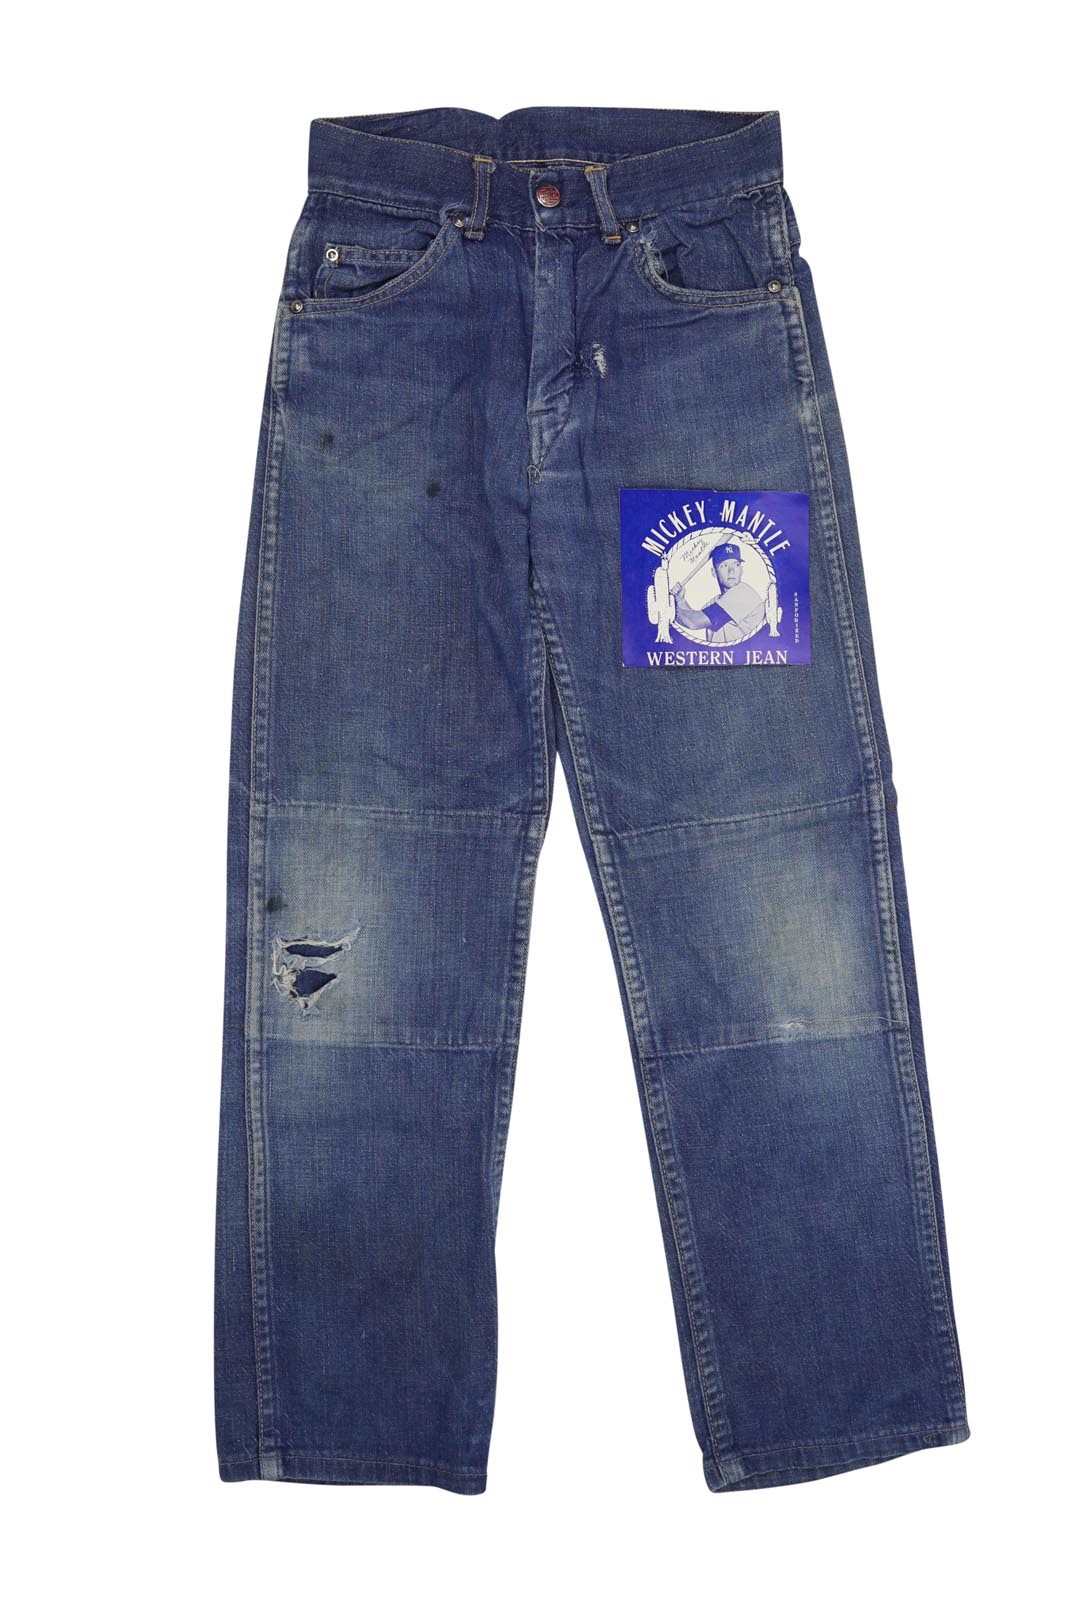 Mantle and Maris - 1960's Mickey Mantle Jeans